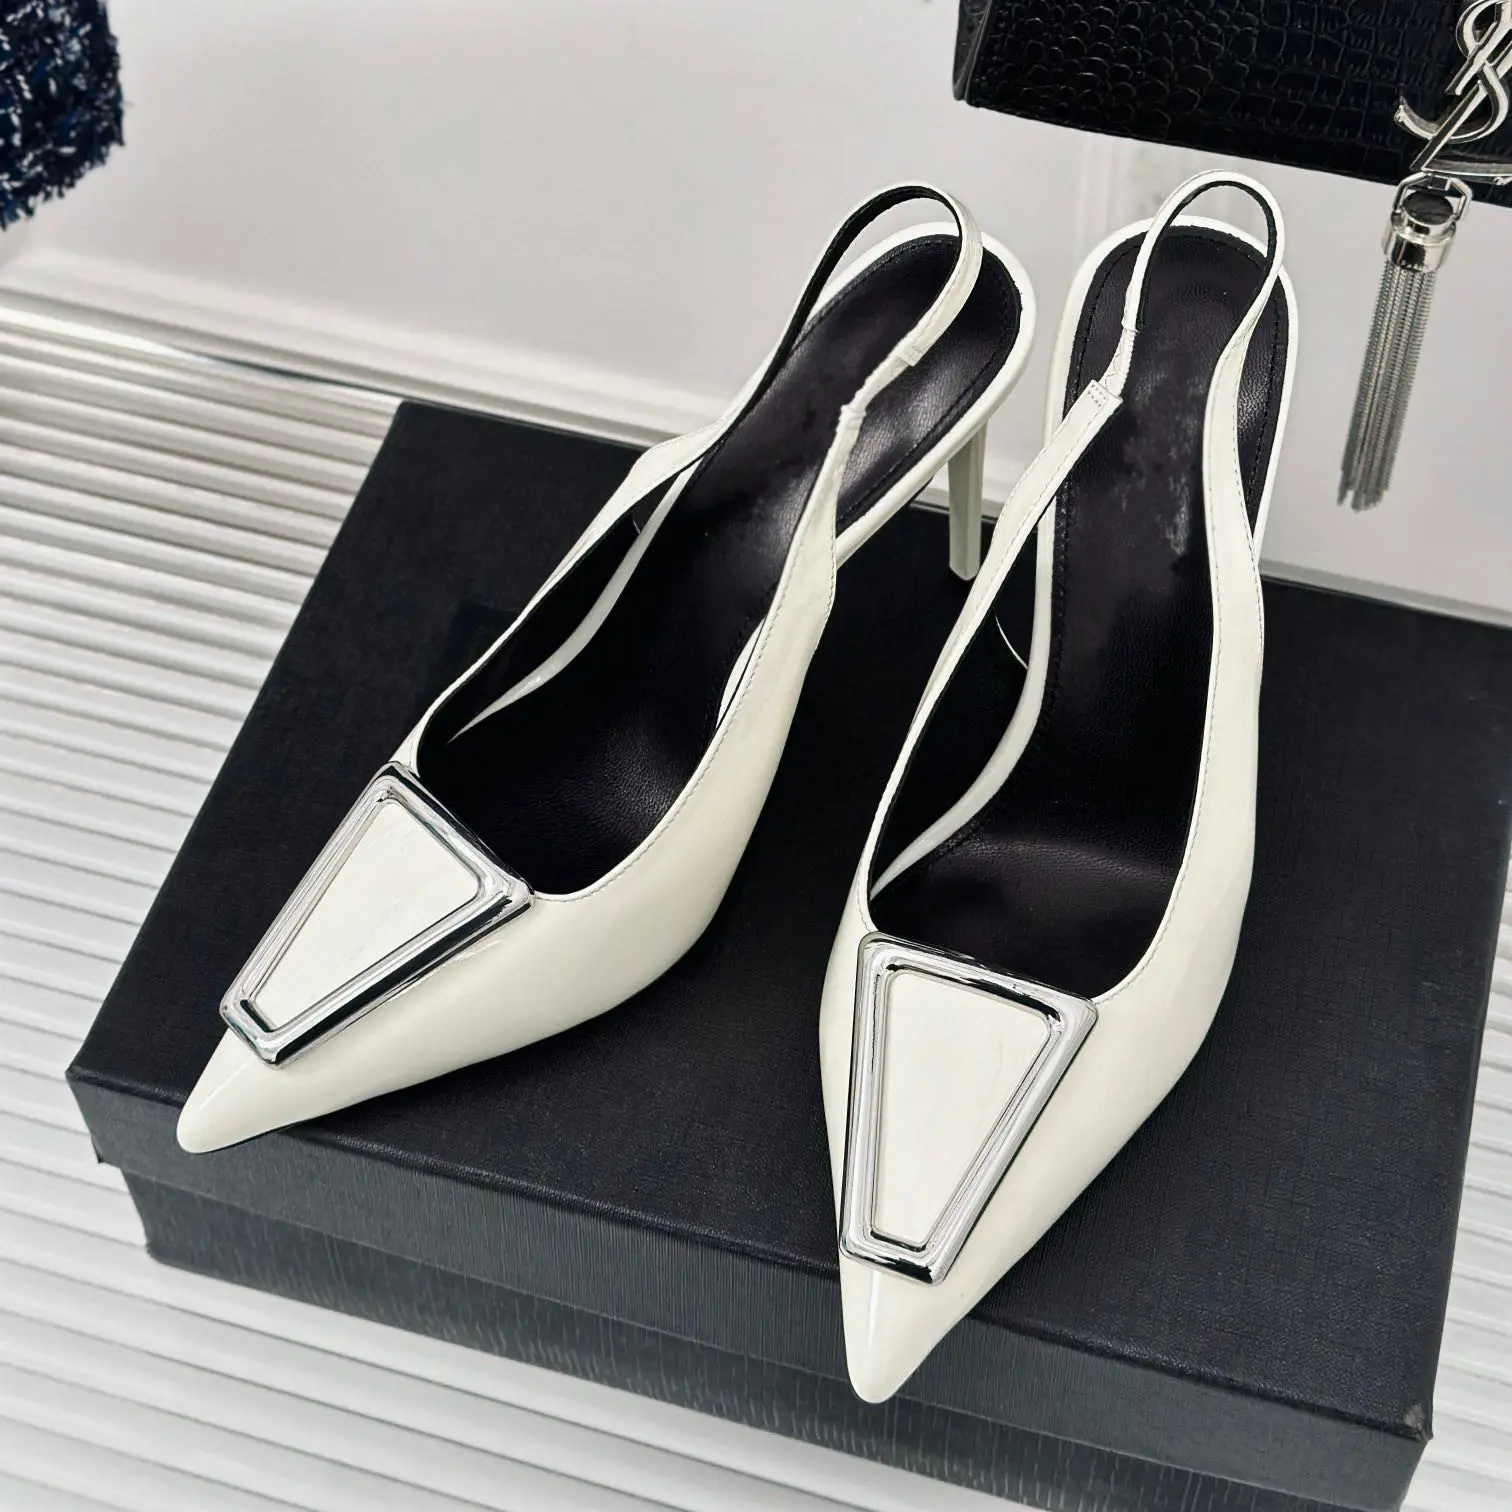 Casual Designer Fashion Women Shoes Sexy Lady White Patent Leather Strappy Pointy Toe High Heels Sandals Zapatos Mujer Sandals women genuine leather sandals square toe supe high heel sandals thick heels buckle sandals ladies summer shoes beige